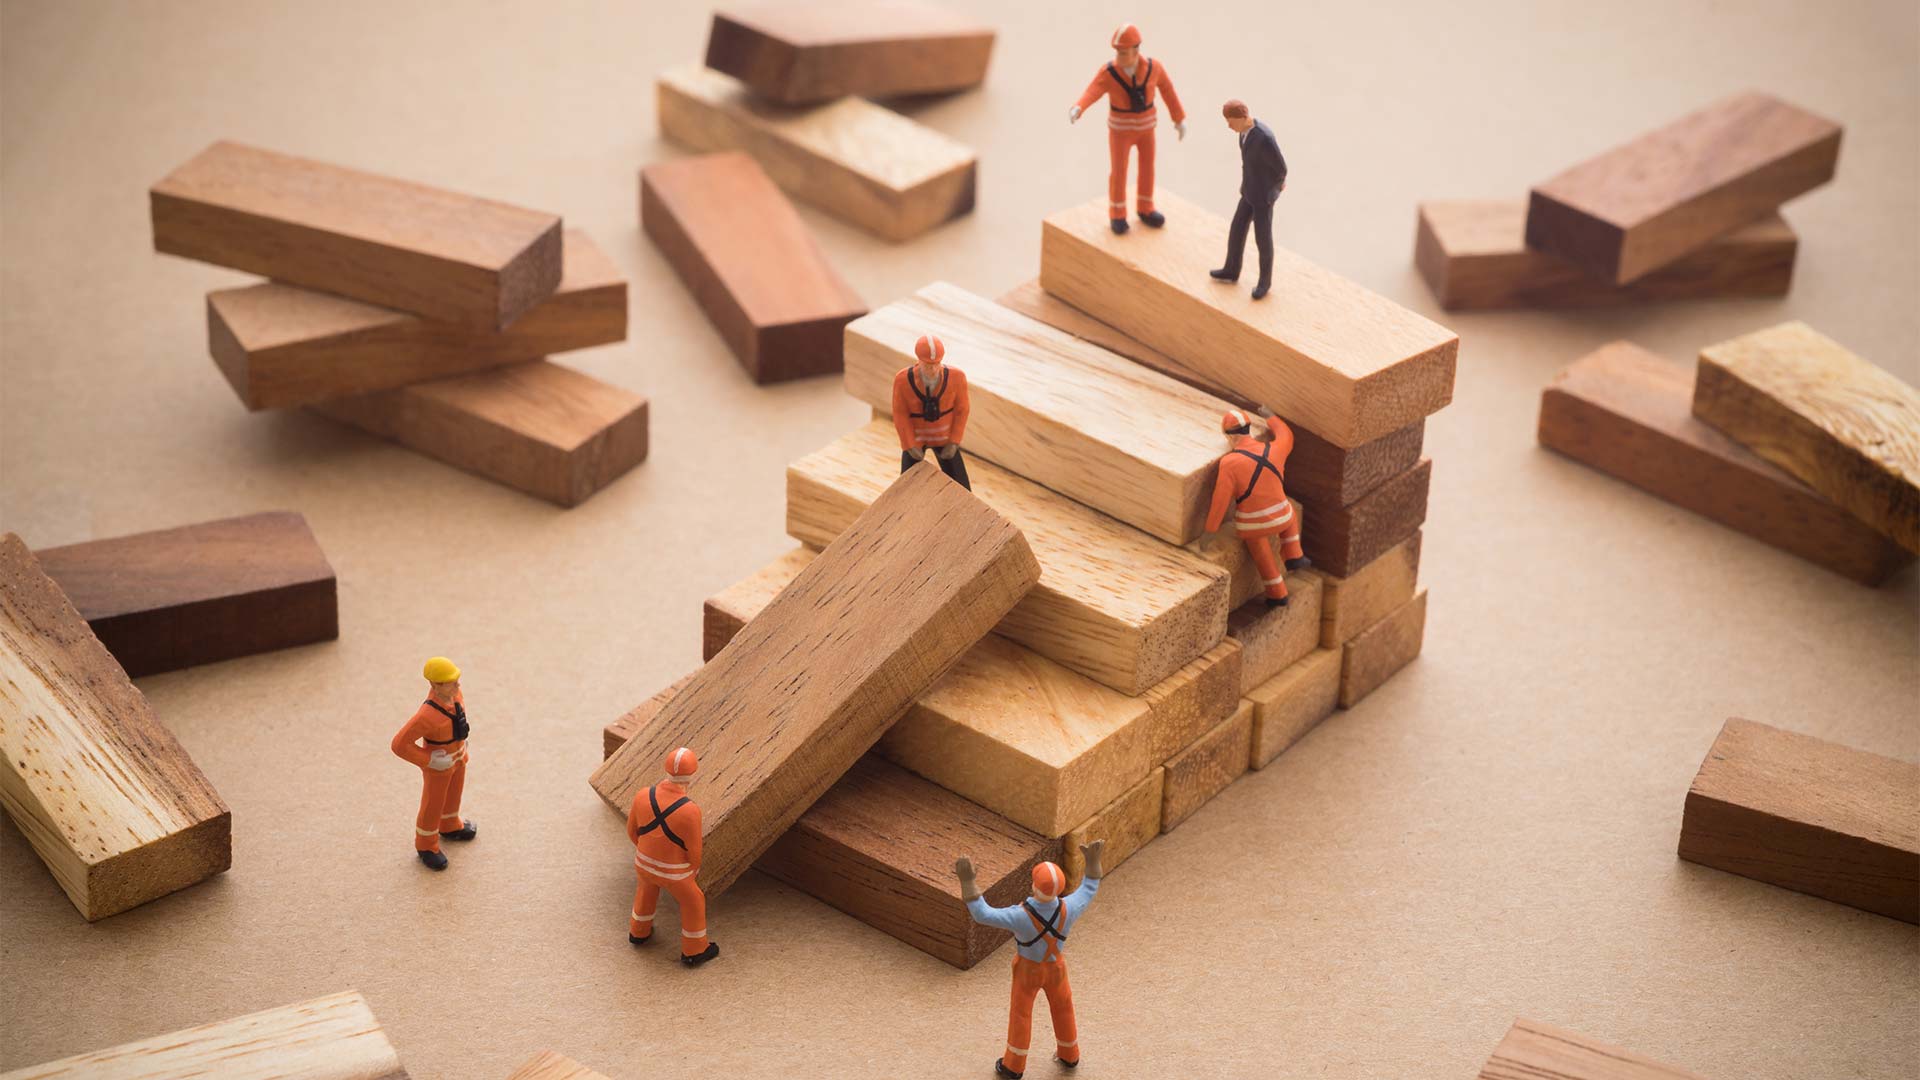 Small people figurines building steps out of wooden jenga pieces